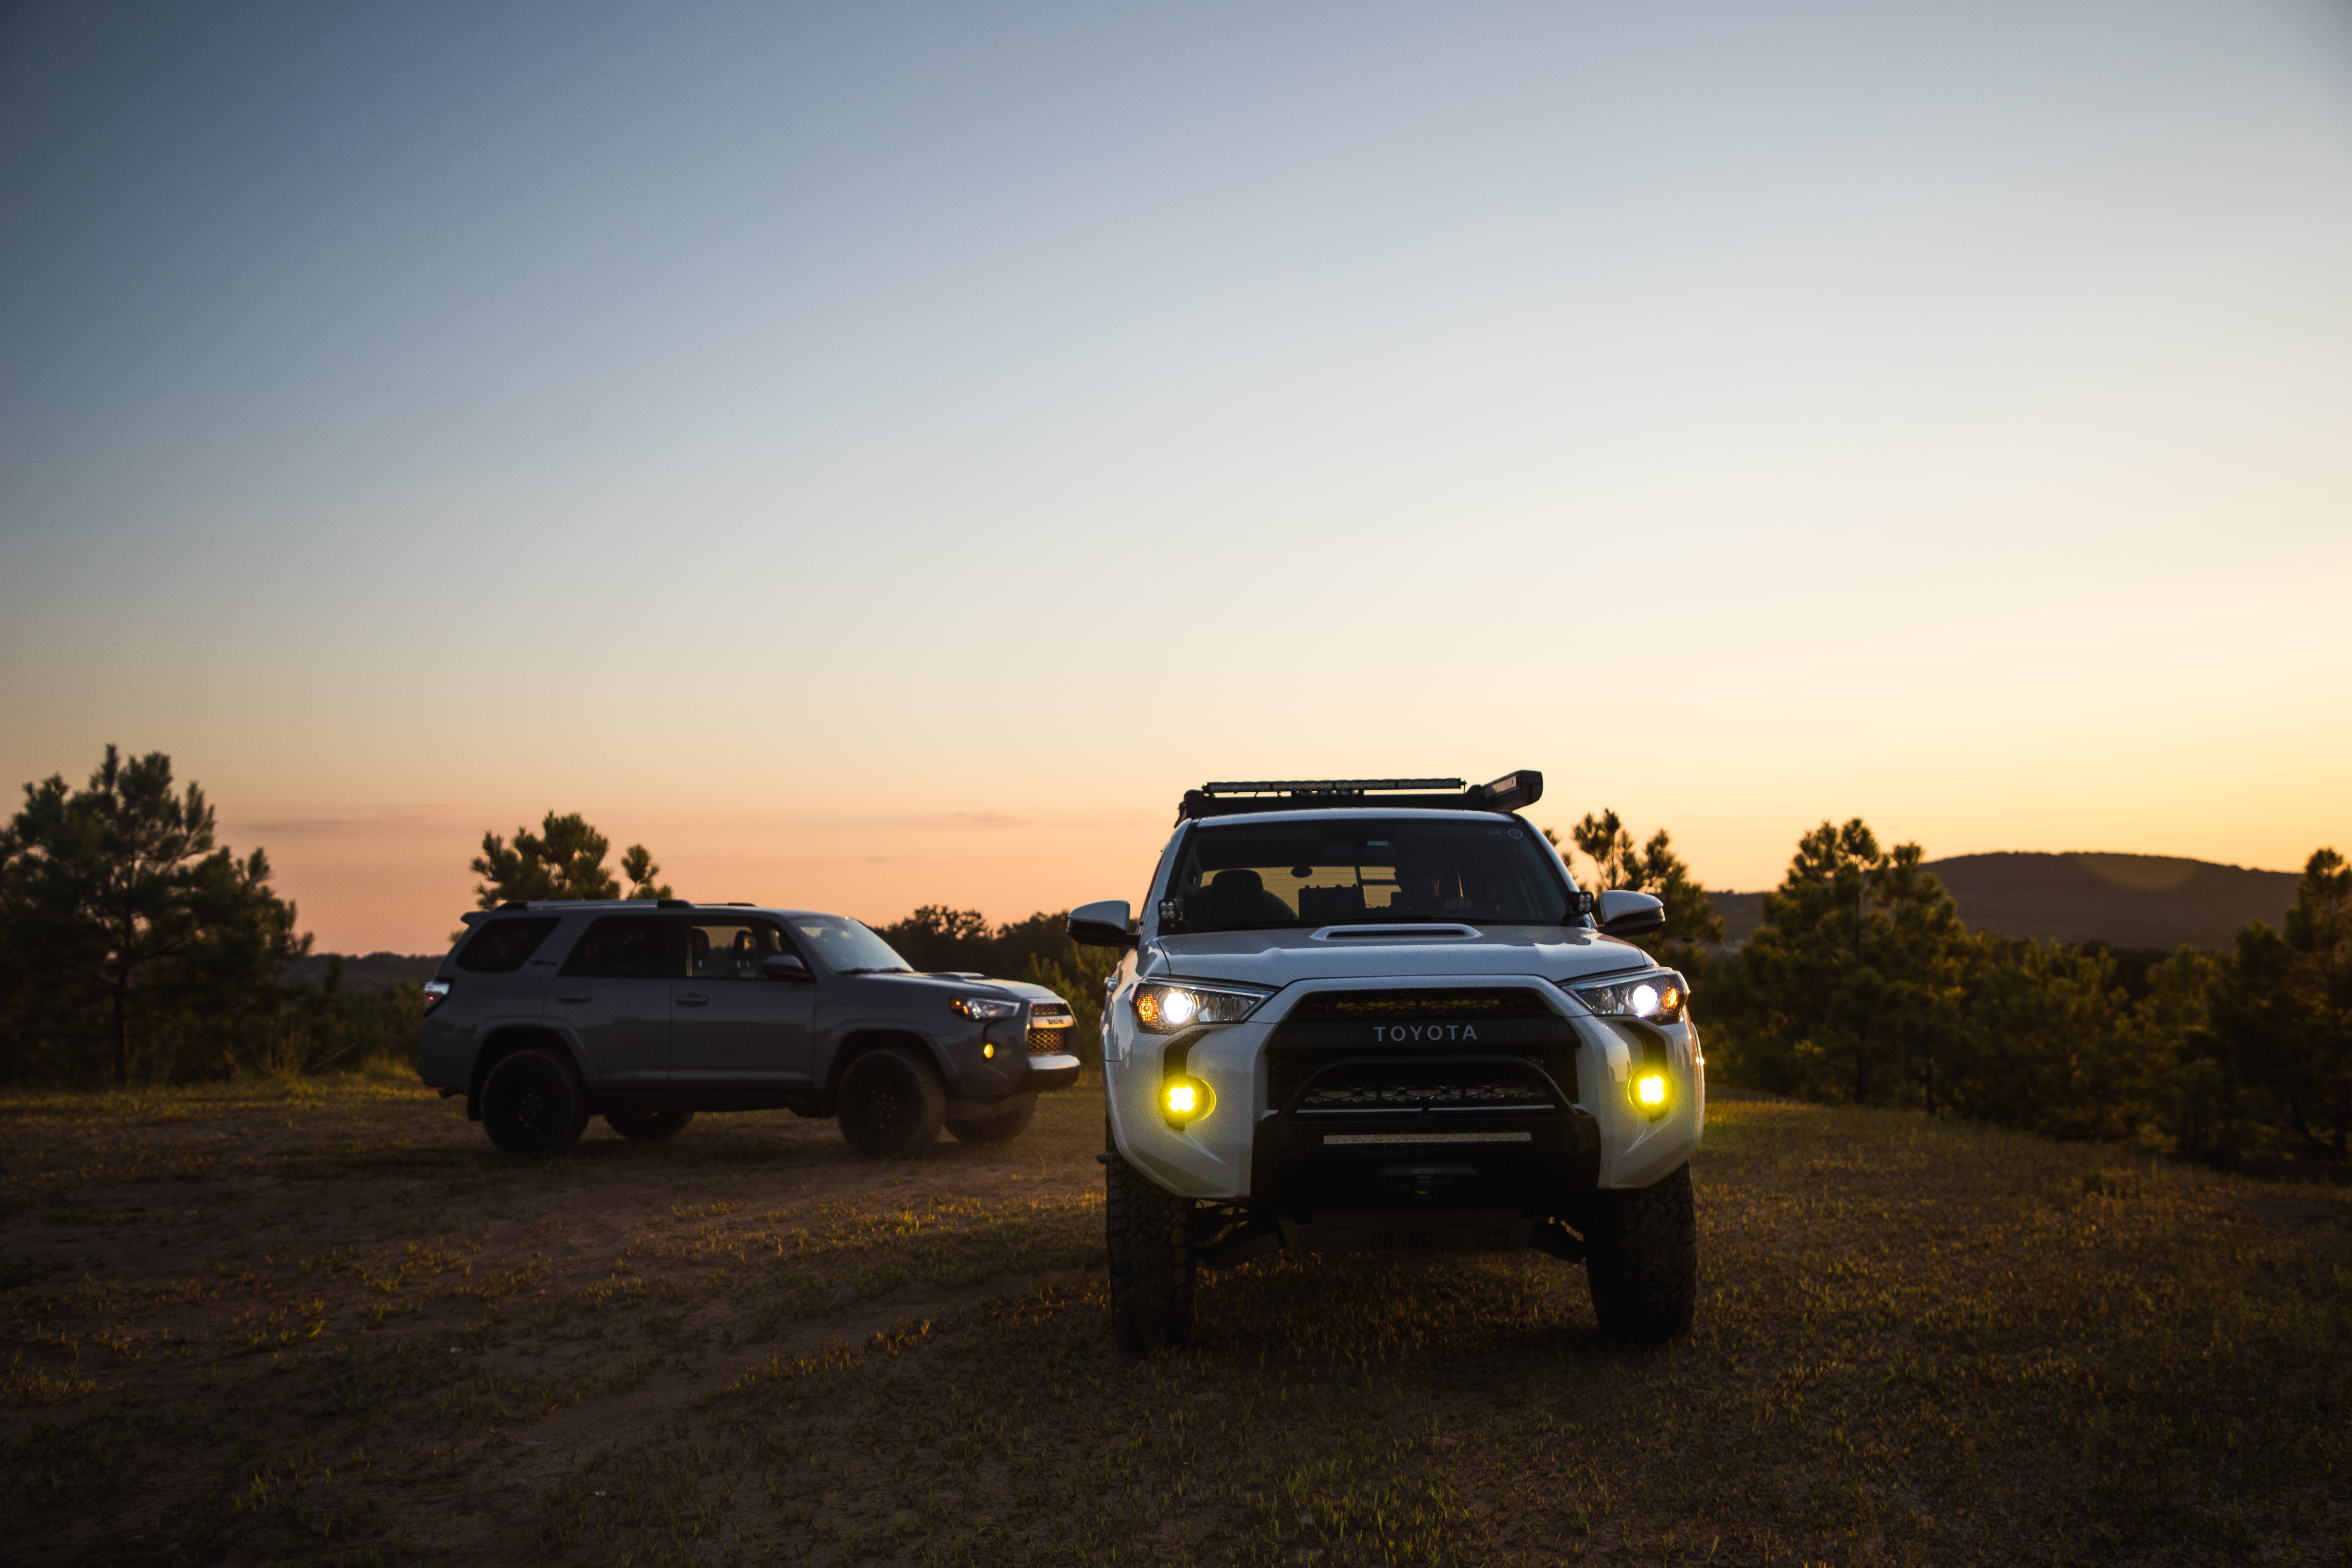 A Toyota Tundra parked in the desert with LED fog lights.